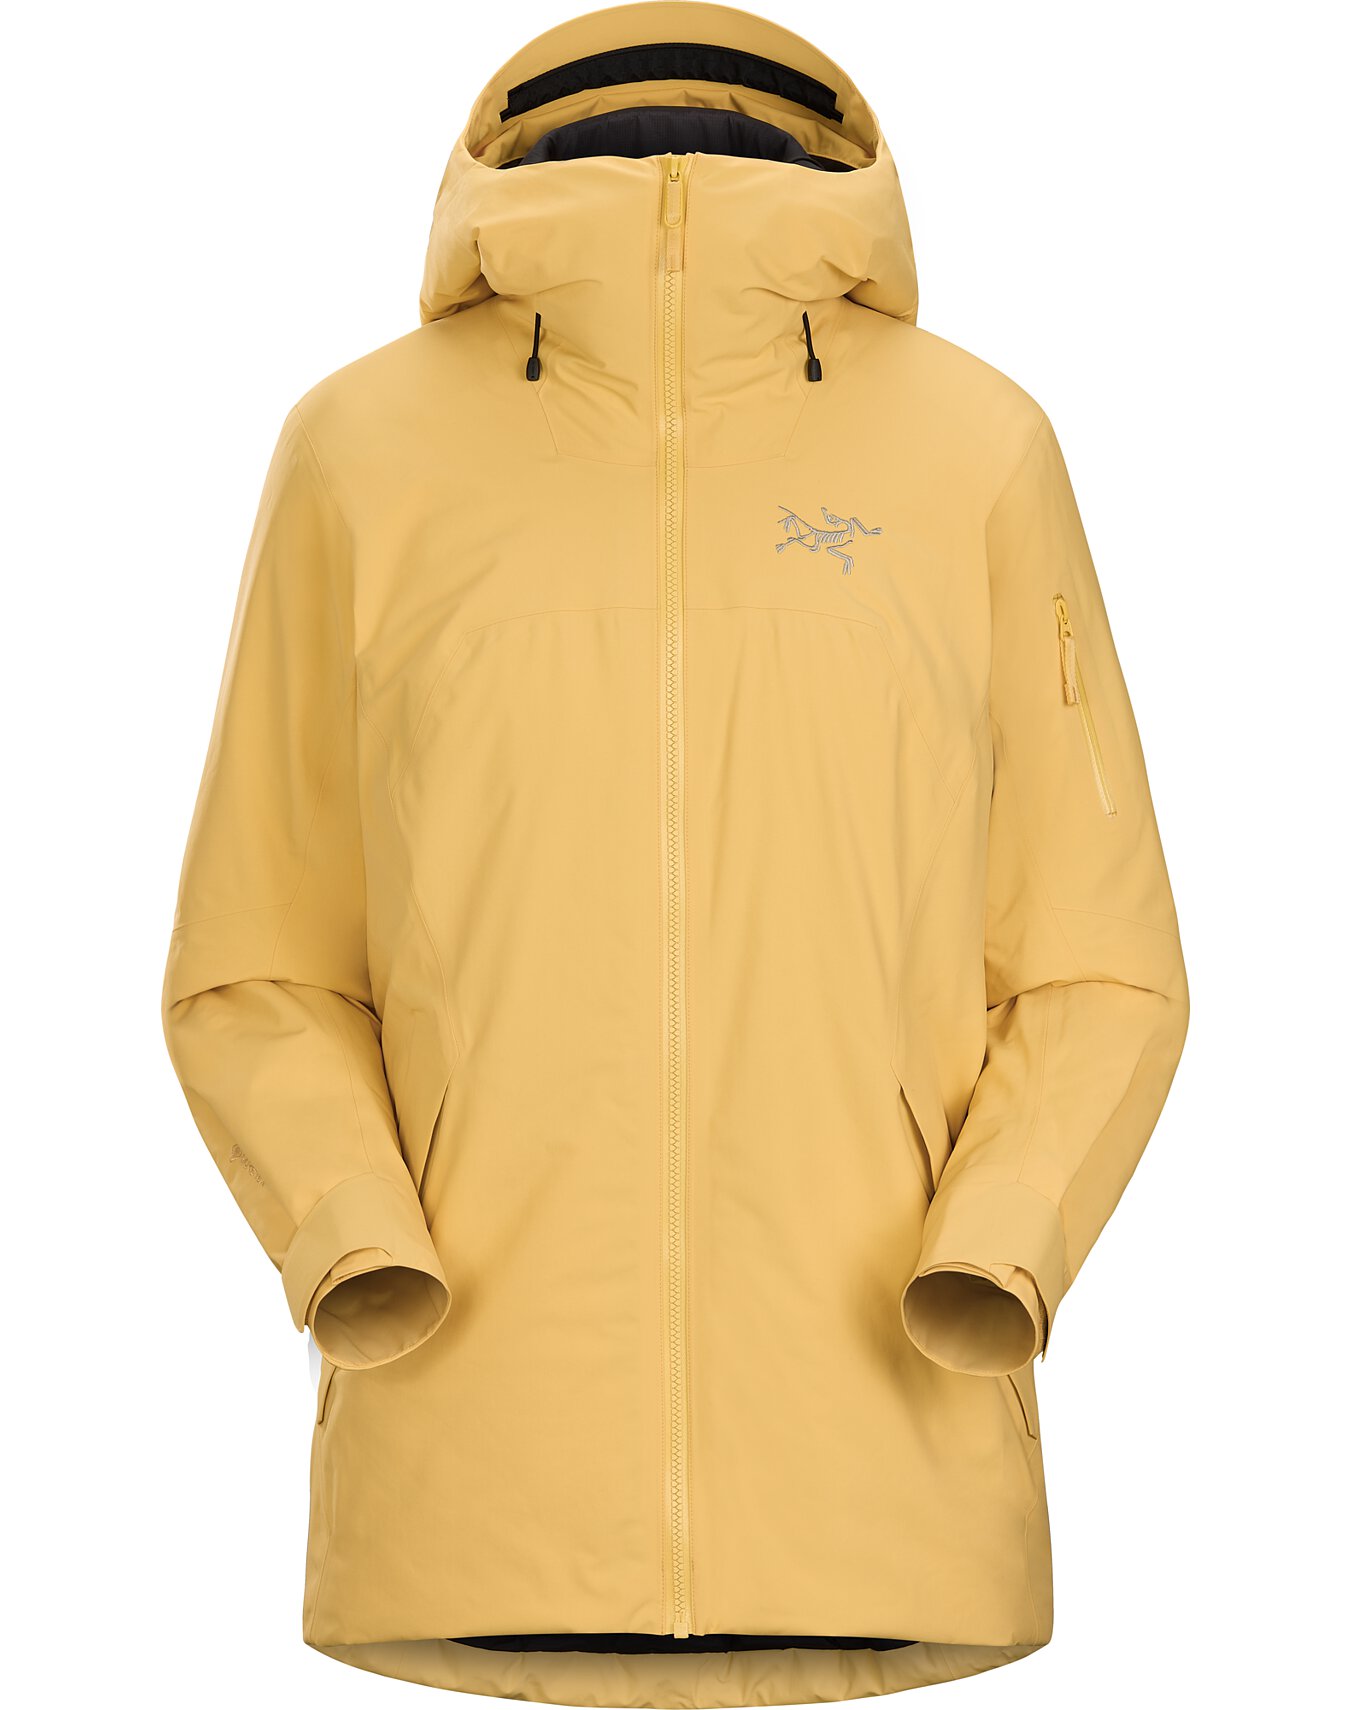 Sentinel Insulated Jacket Women's | Arc'teryx Outlet